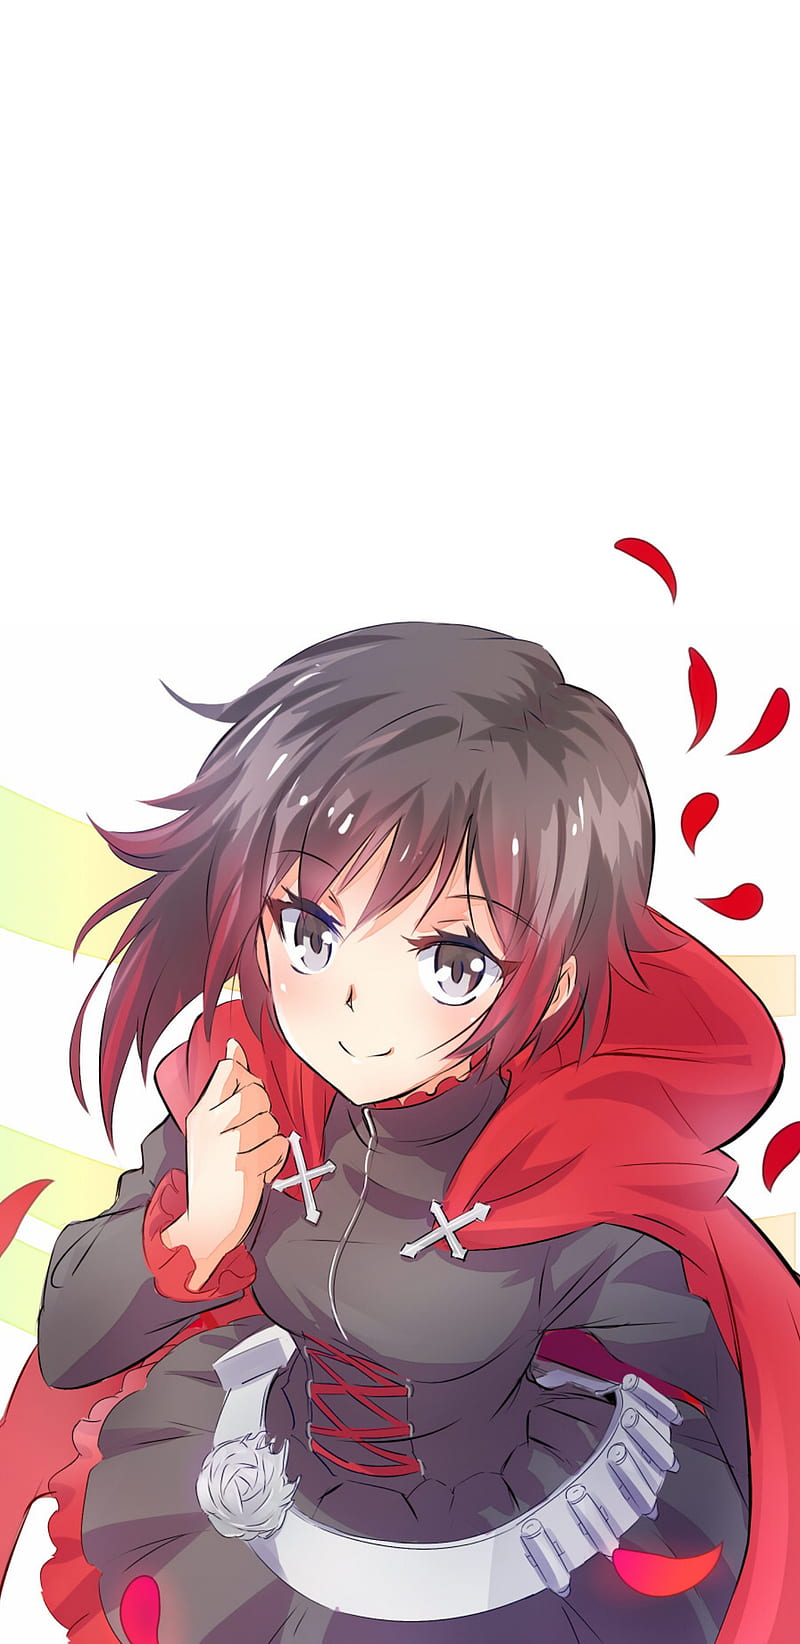 Anime Style Ruby  RWBY  Know Your Meme